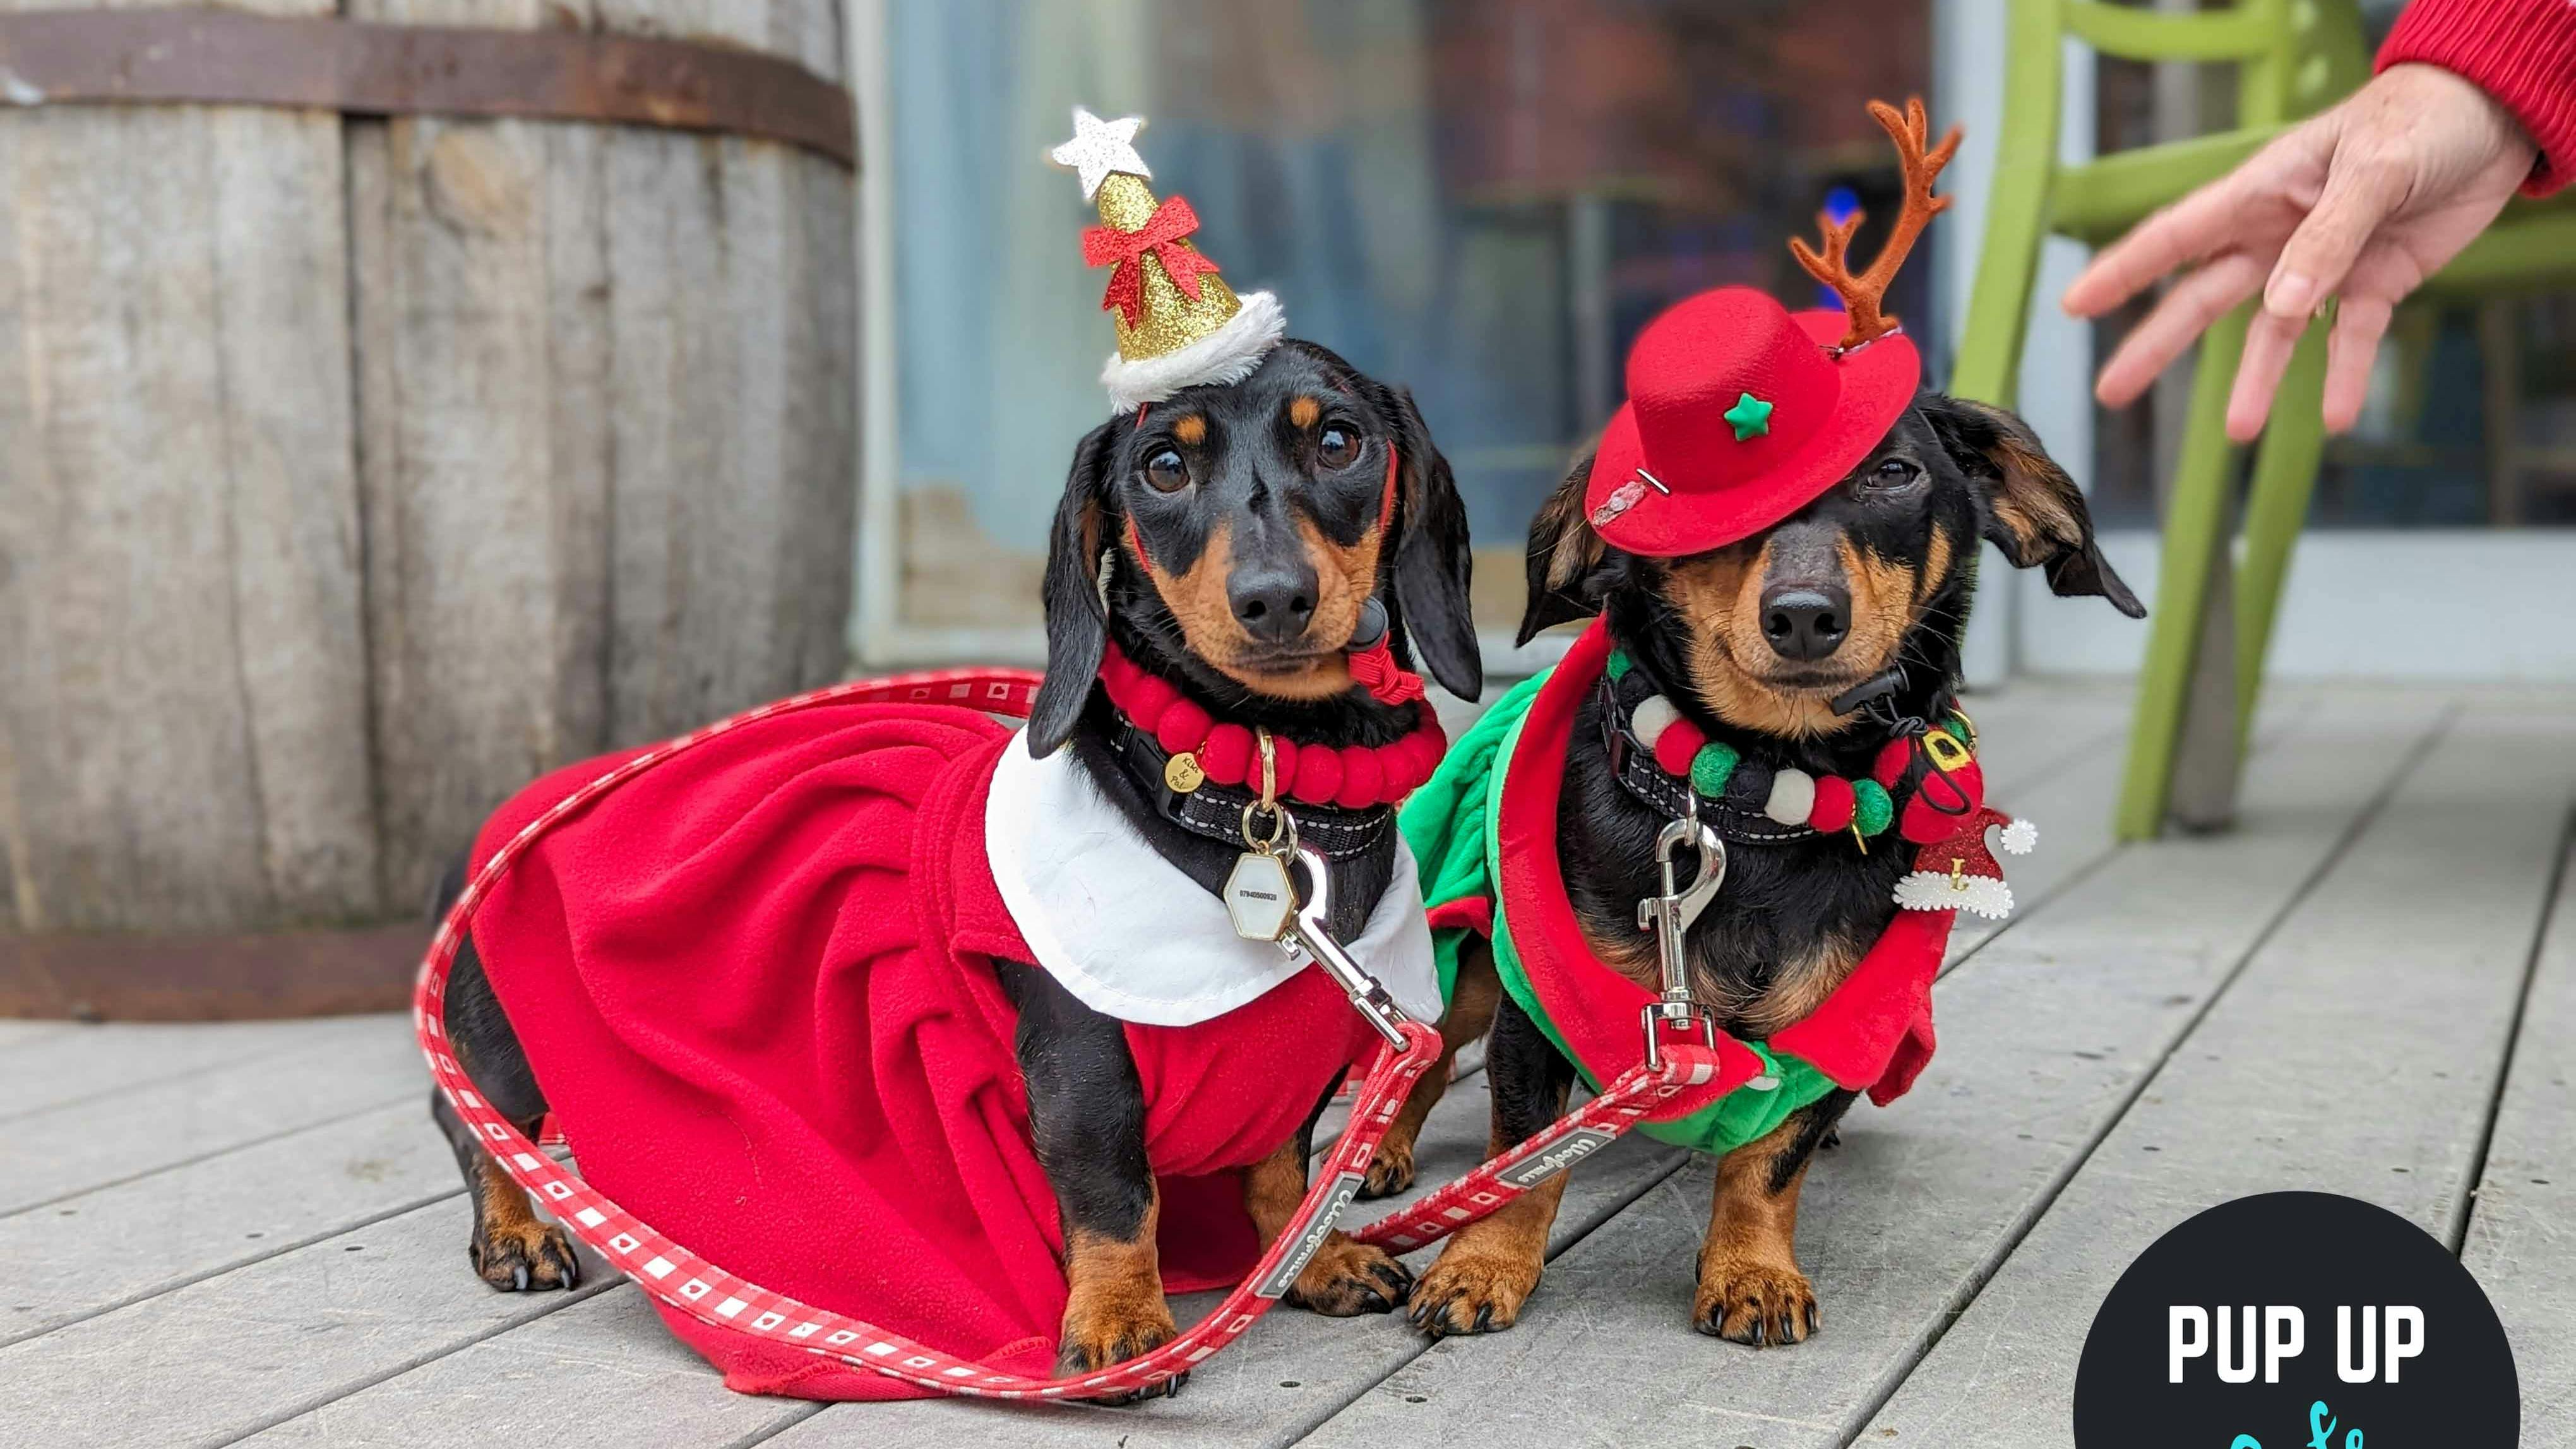 The Pup Up Café is back with its Christmas extravaganza